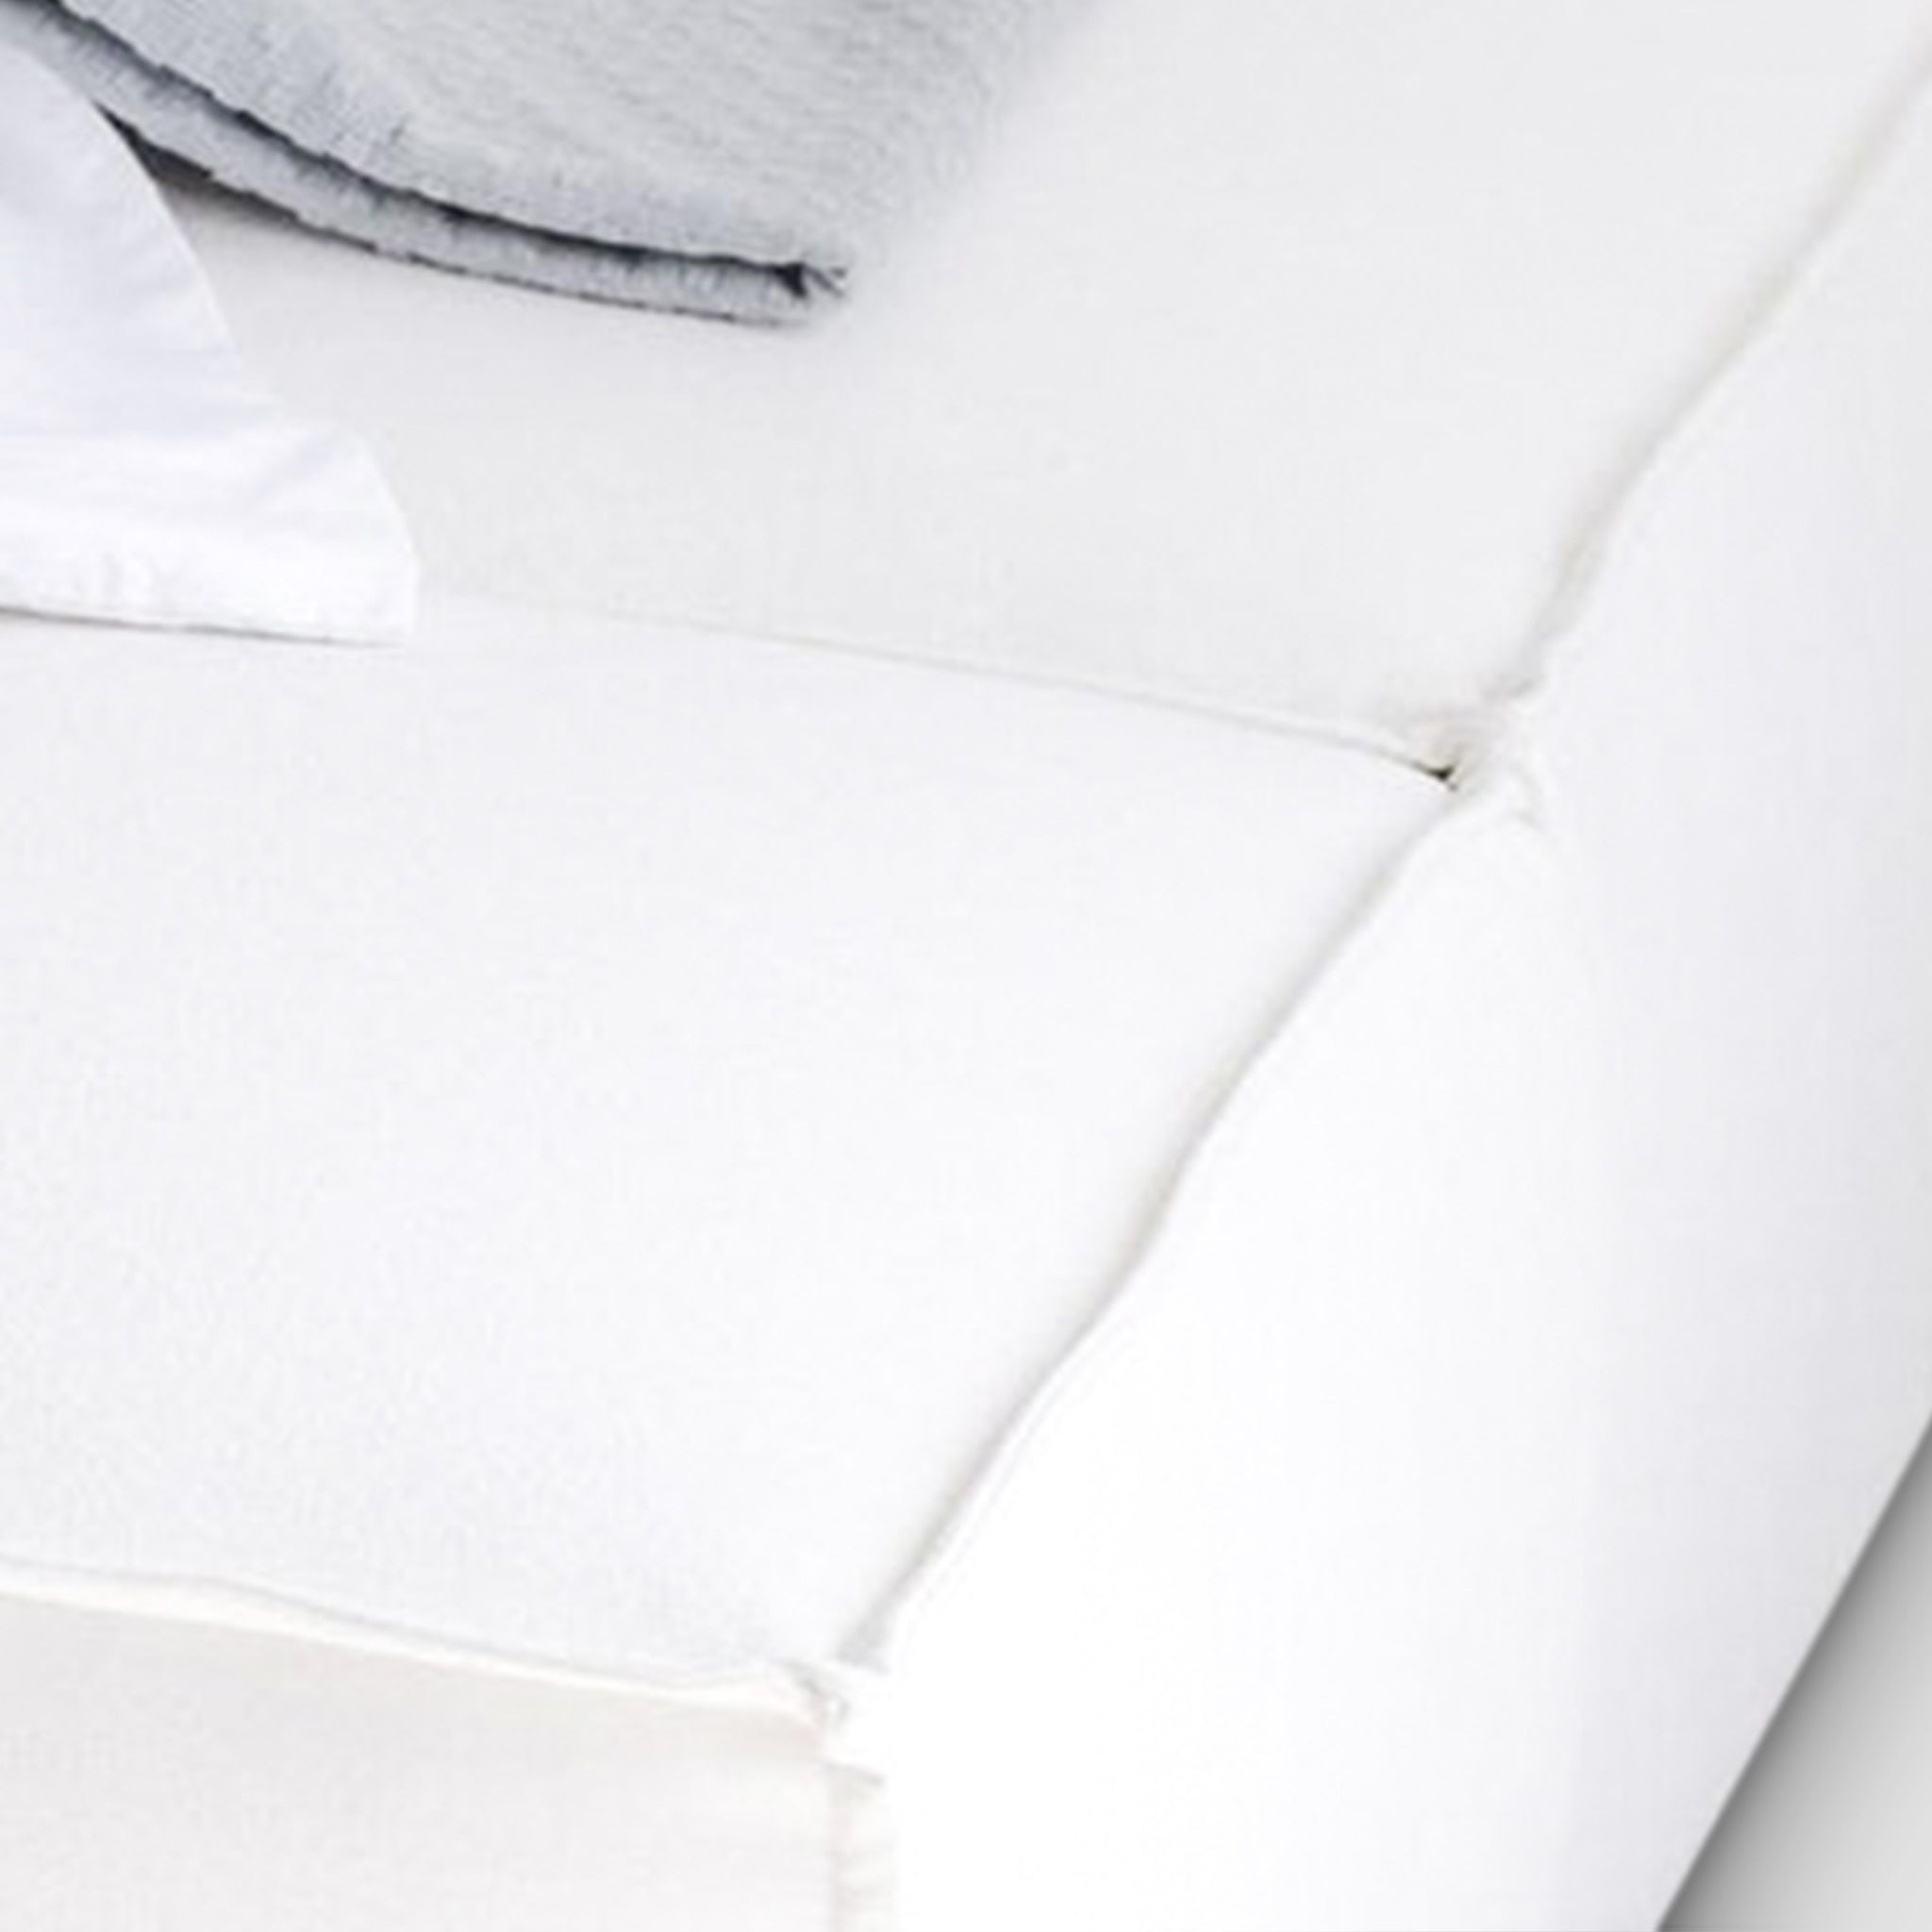 Close-up of plush white mattress with a gray blanket. Soft and inviting sleep surface.